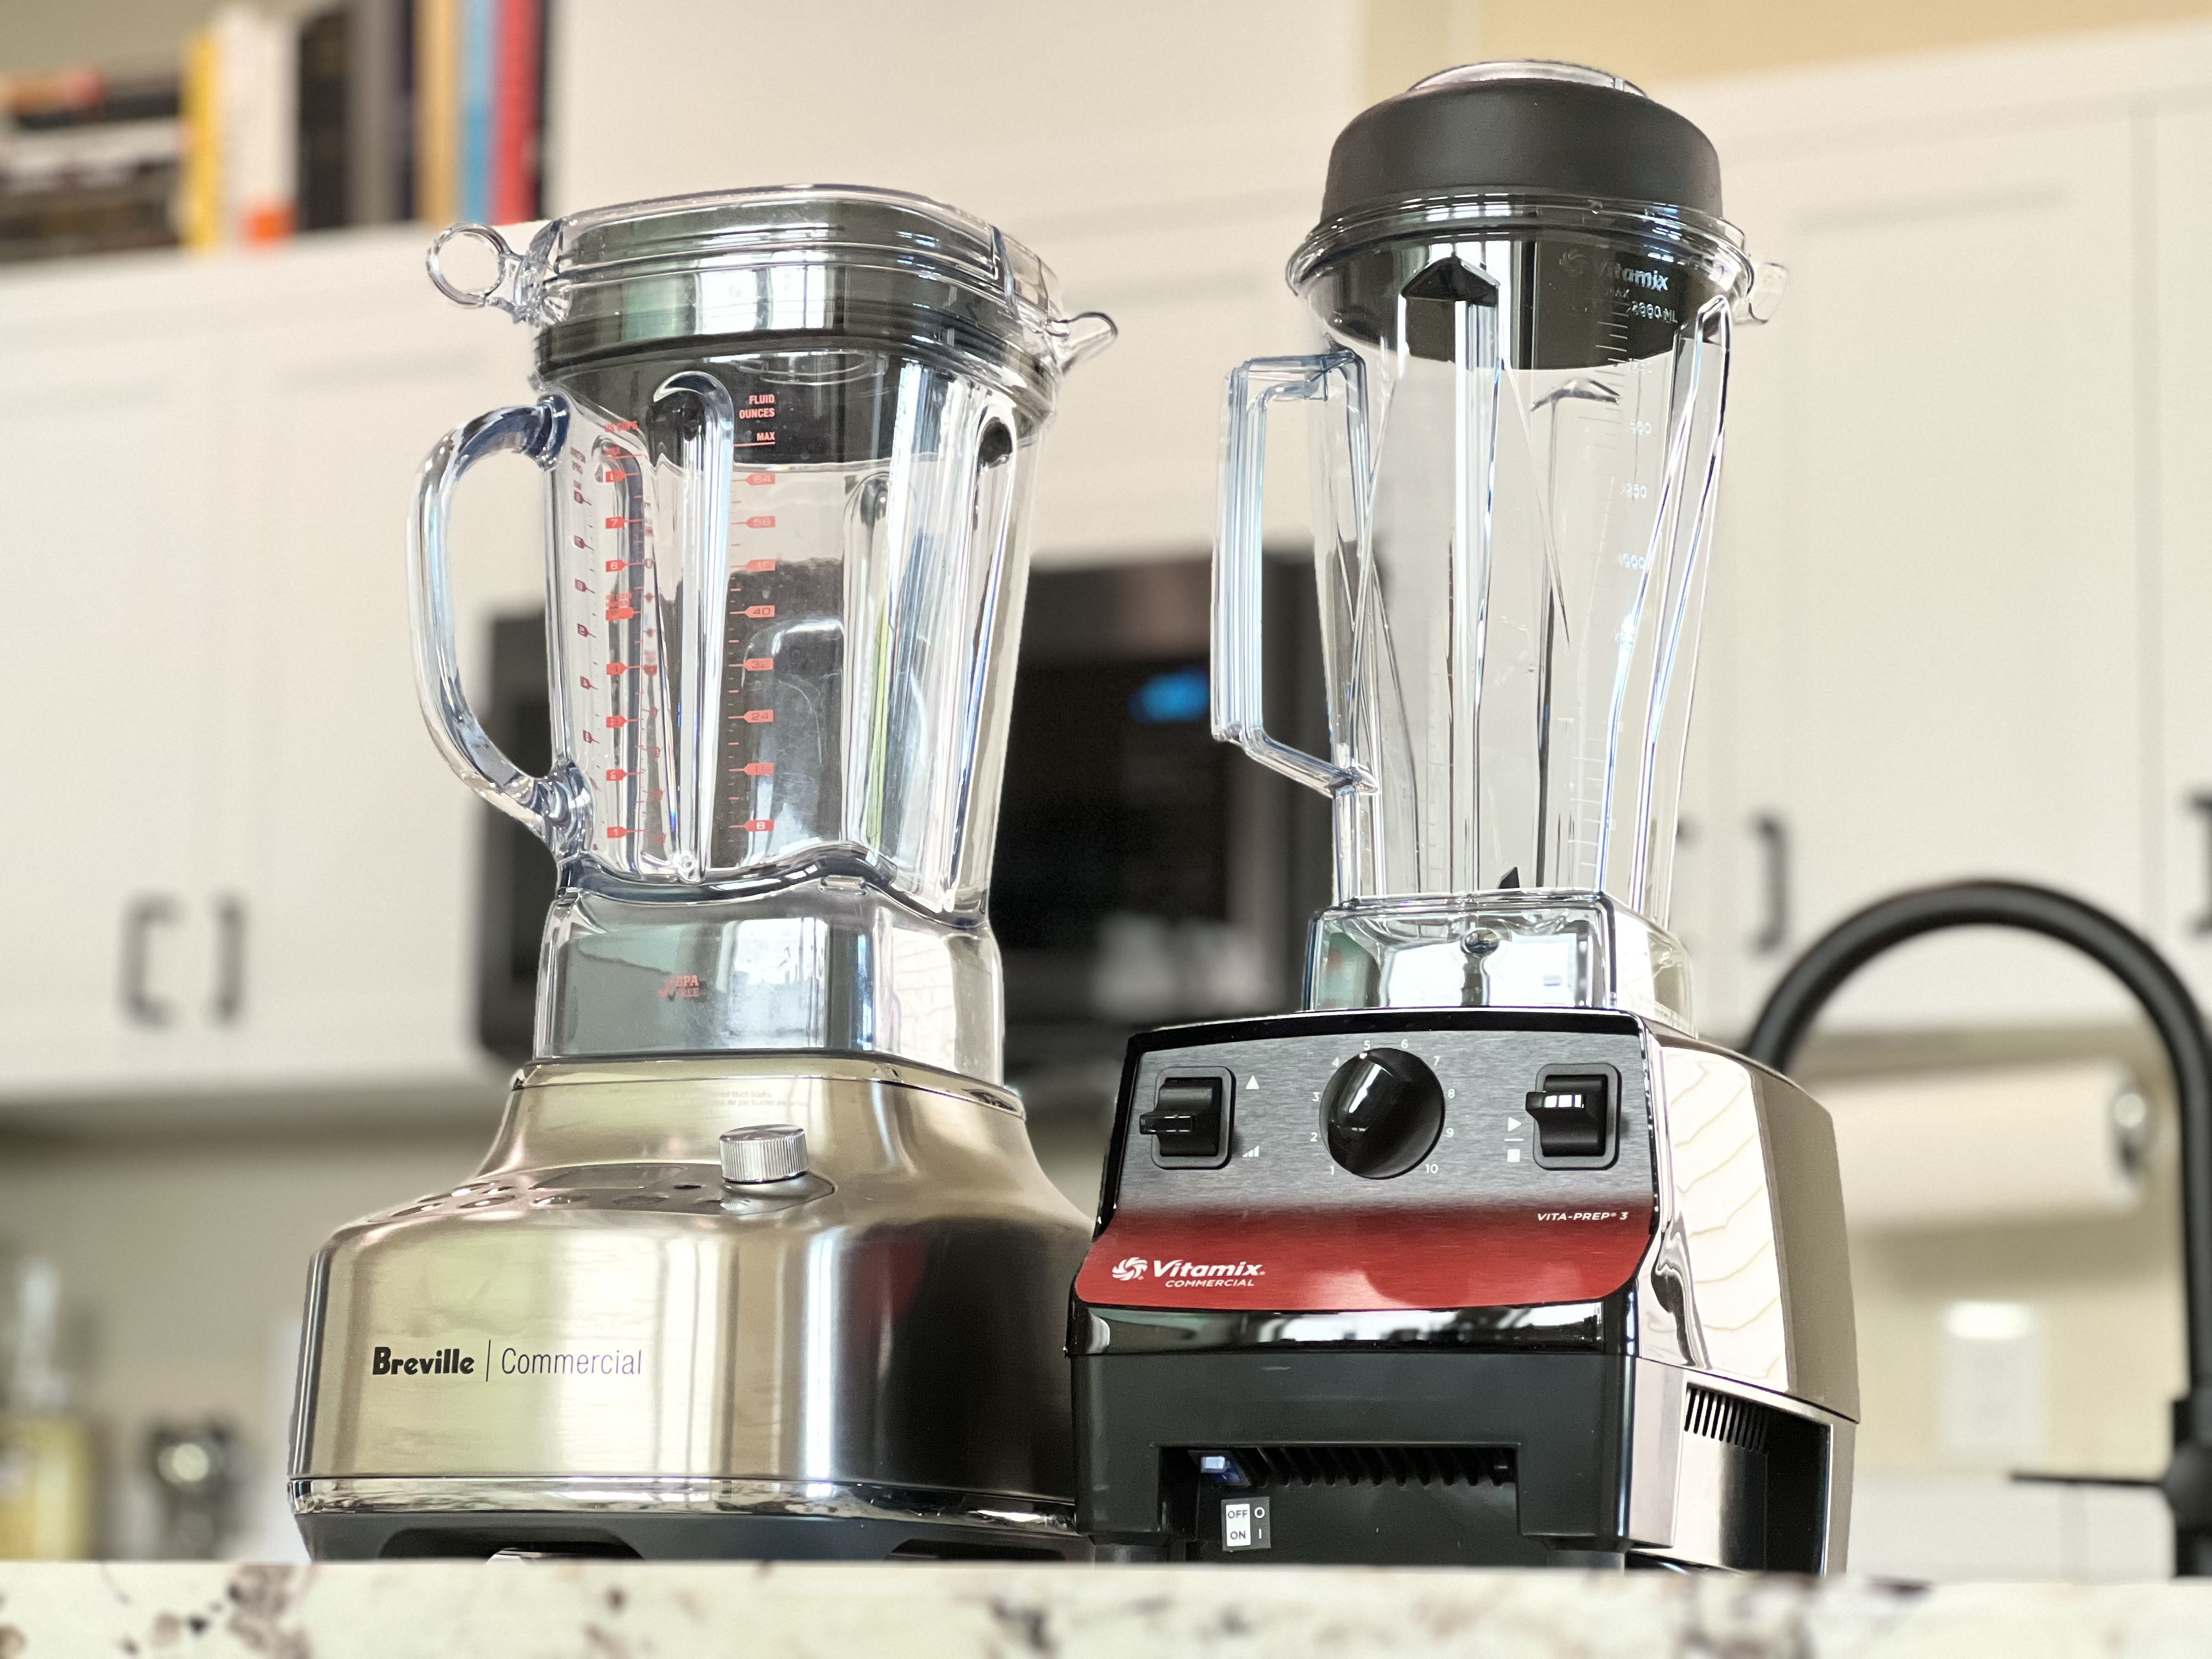 Breville vs. Vitamix: A blender showdown with a clear winner - The Manual